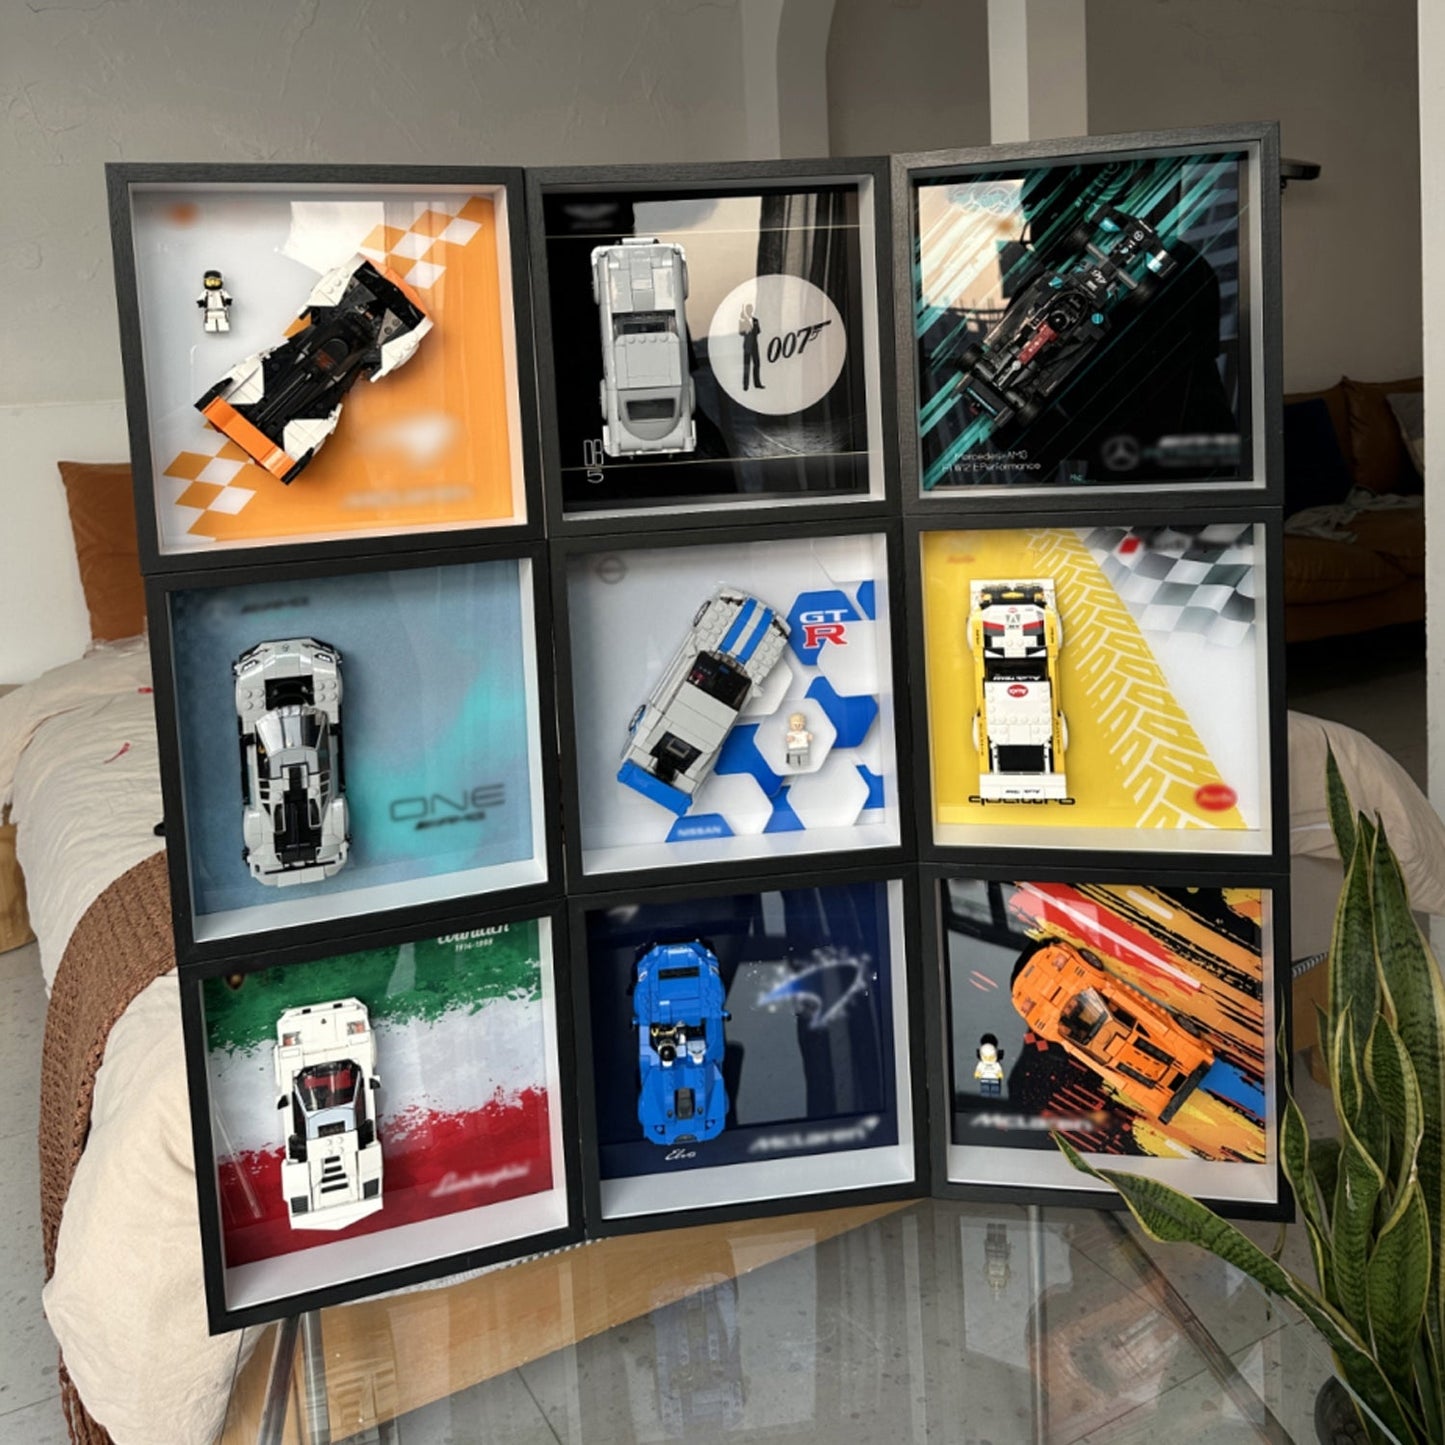 iLuane Display Wallboard for Lego Speed Champions Formula E Panasonic Jaguar Racing Gen2 car 76898-1, Adult Collectibles Lego Car Wall Mount, Gifts for Lego Lovers(Only Display Wallboard)